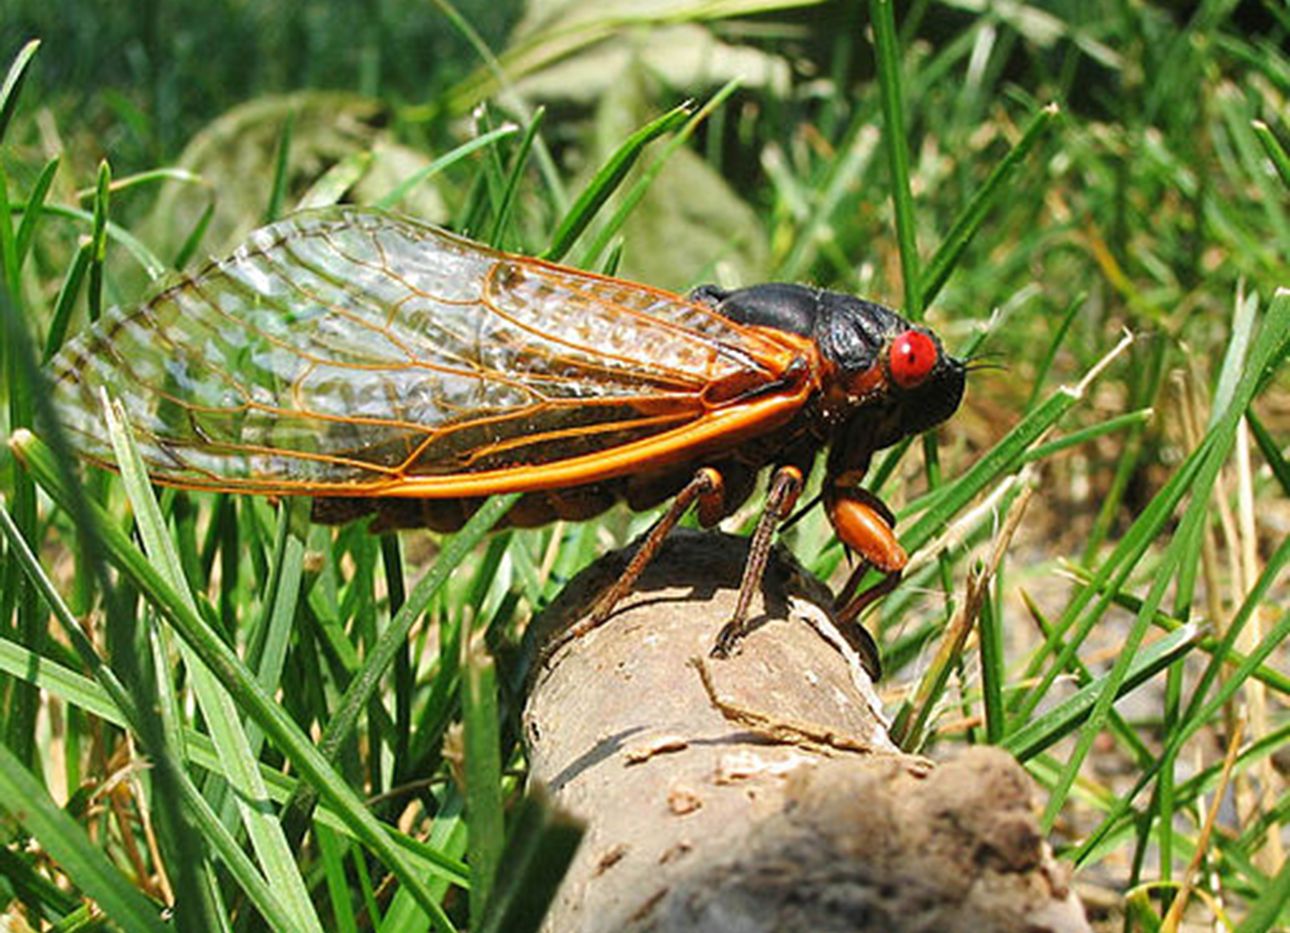 A Brood X cicada on a log, surrounded by grass.